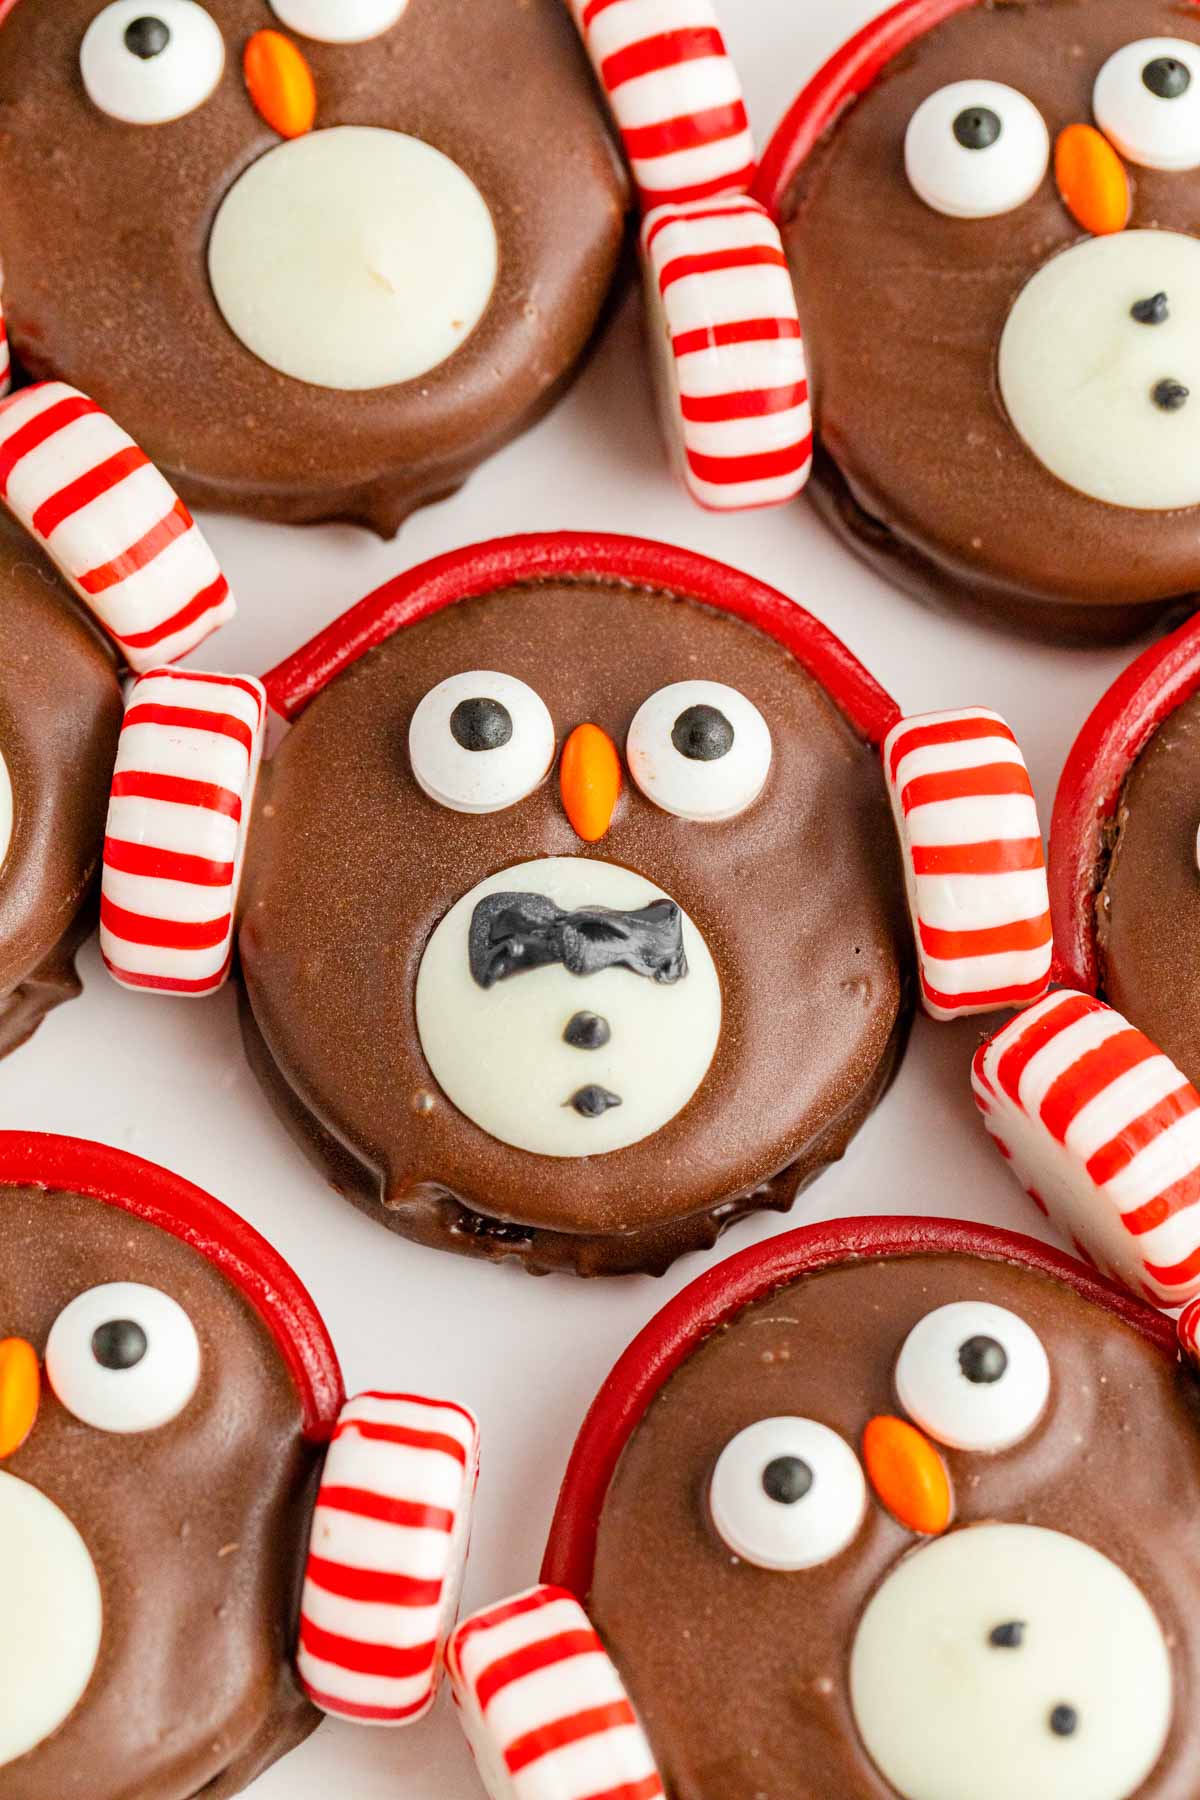 Chocolate owl cookies with candy canes and candy canes.